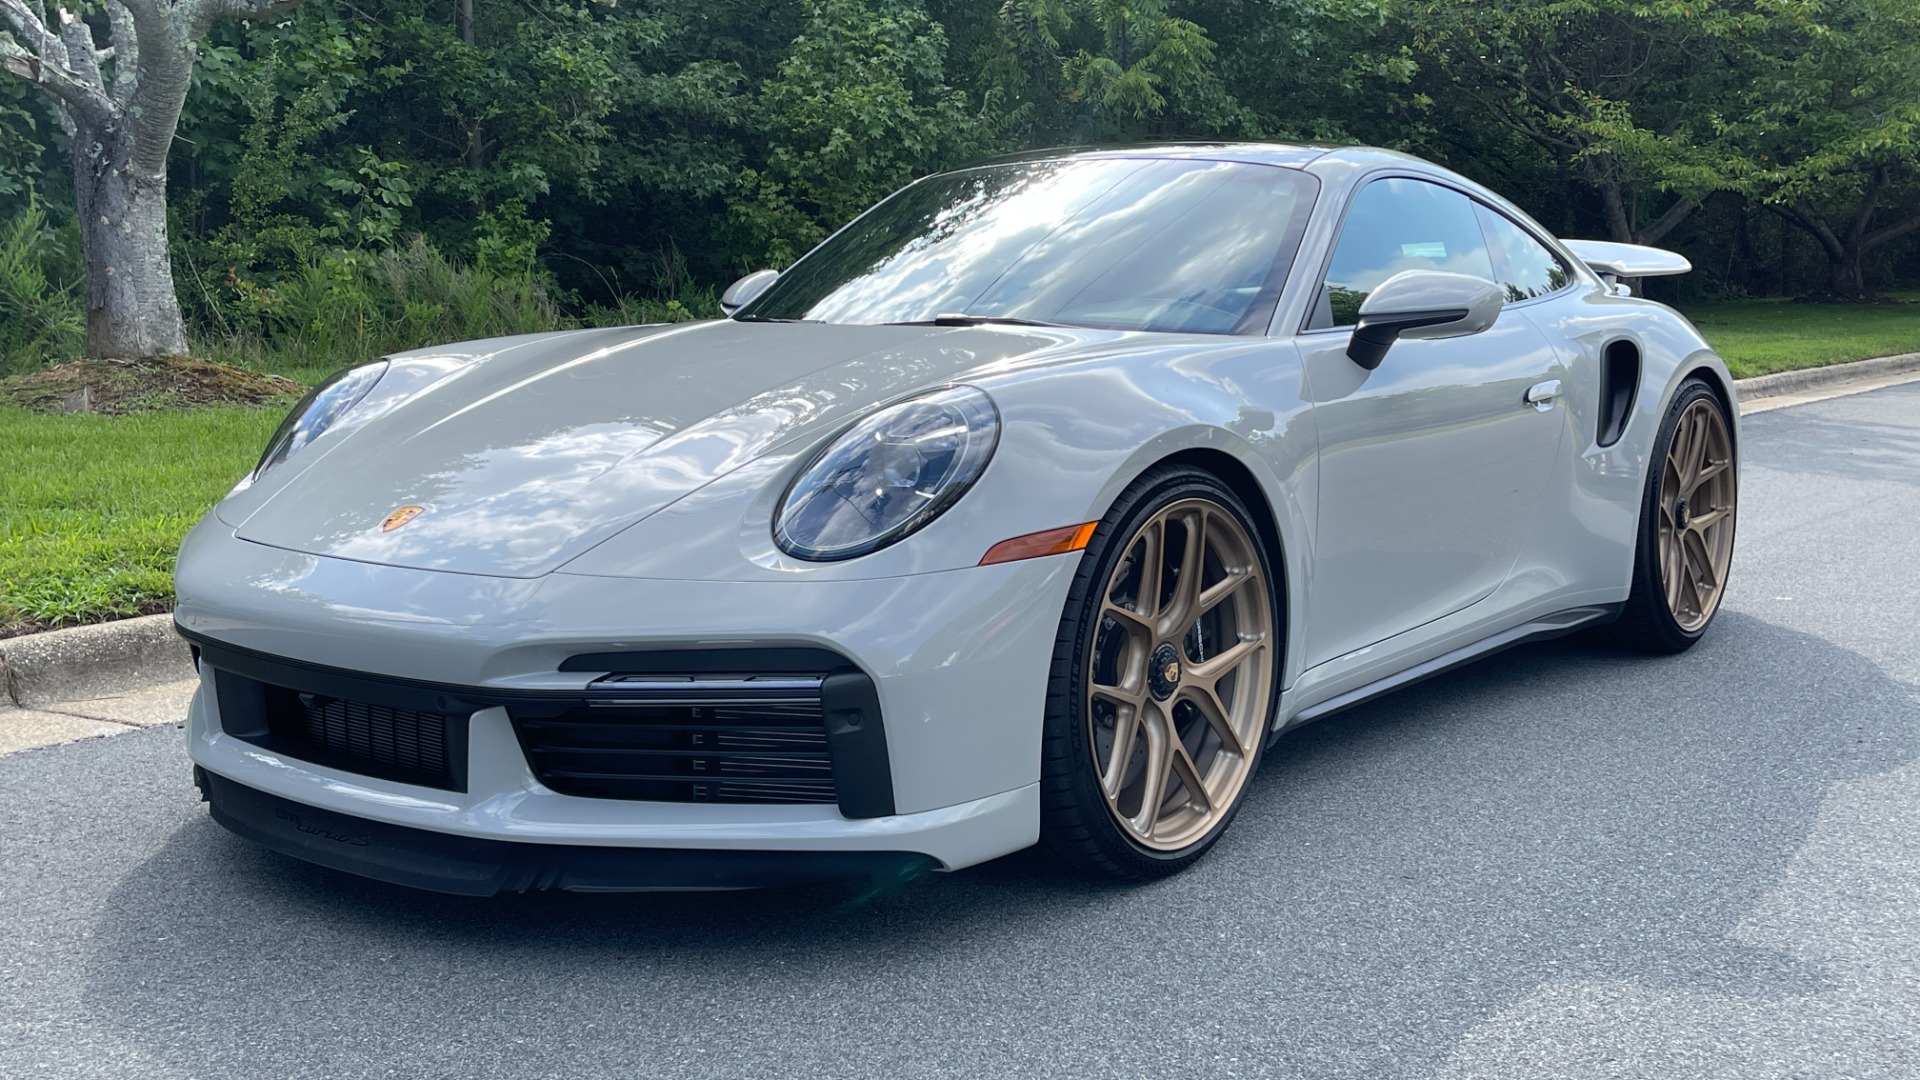 Used 2021 Porsche 911 Turbo S / HRE WHEELS / FRONT LIFT / MATRIX LIGHTS / PASM SUSPENSION for sale $279,000 at Formula Imports in Charlotte NC 28227 3